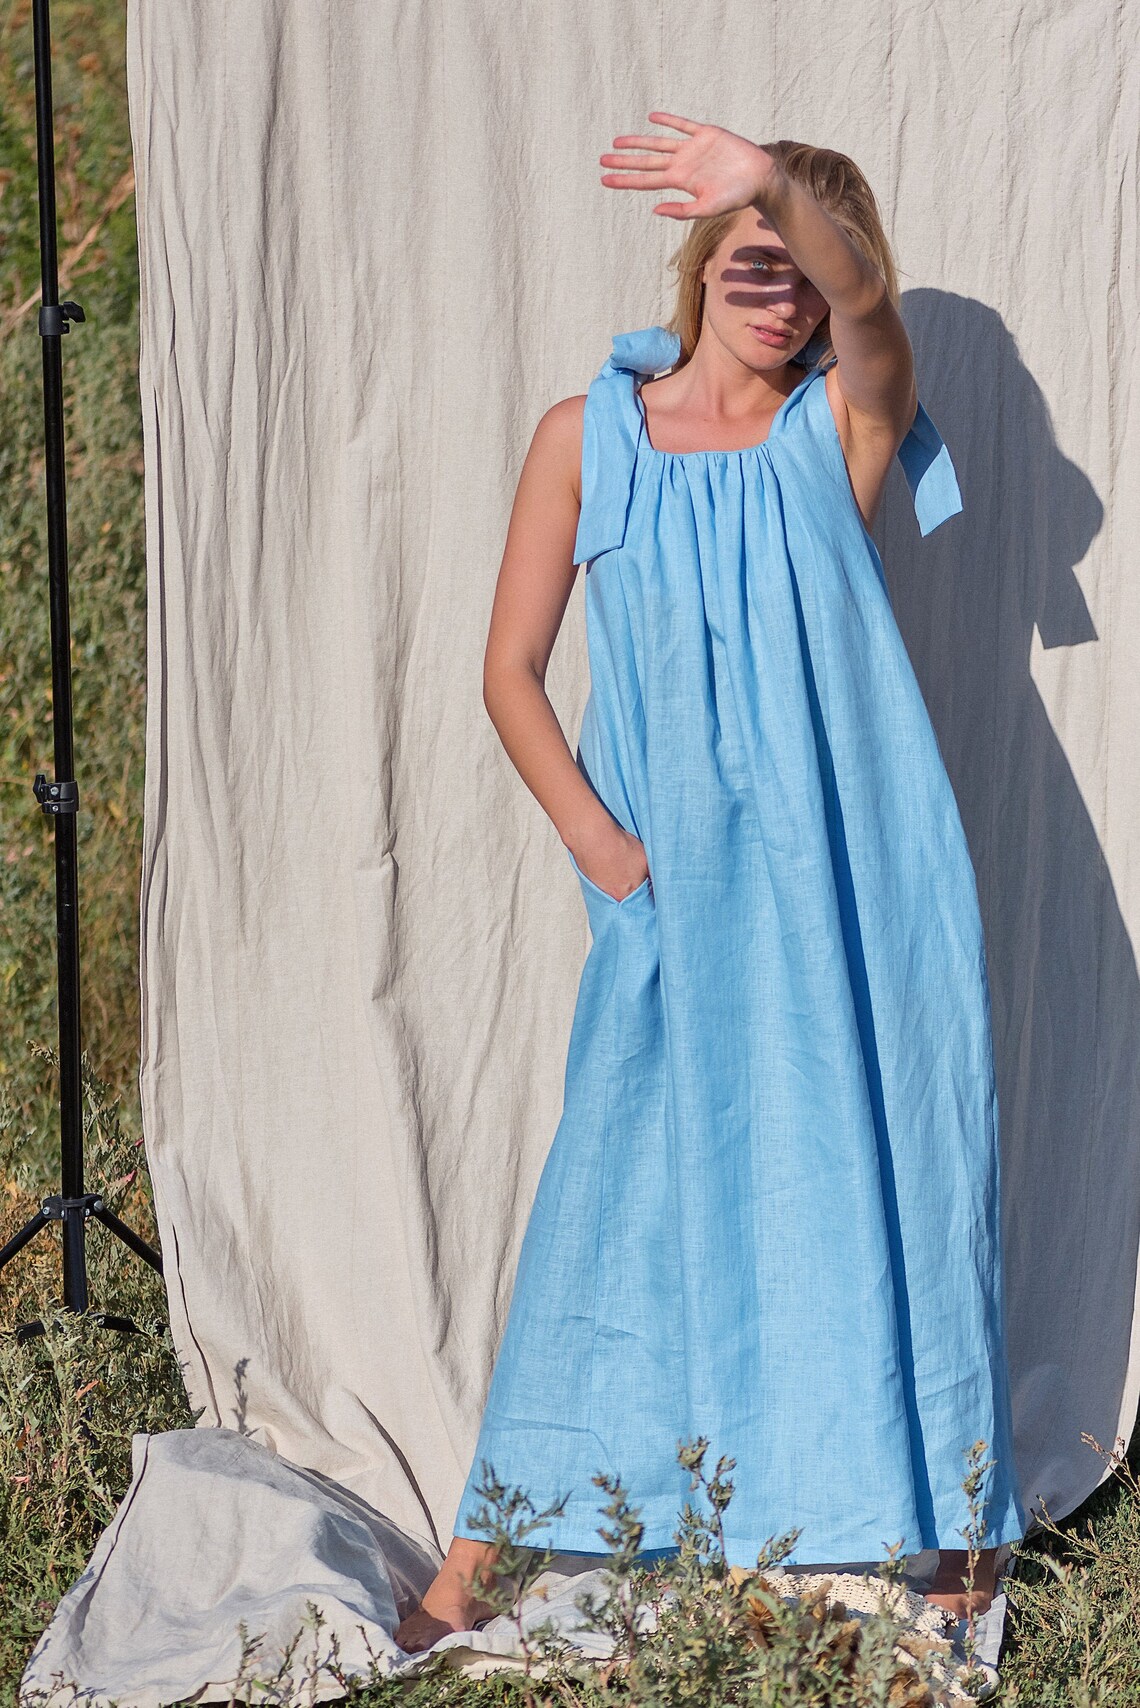 Light Blue linen maxi dress with wide strap and bows. Summer | Etsy